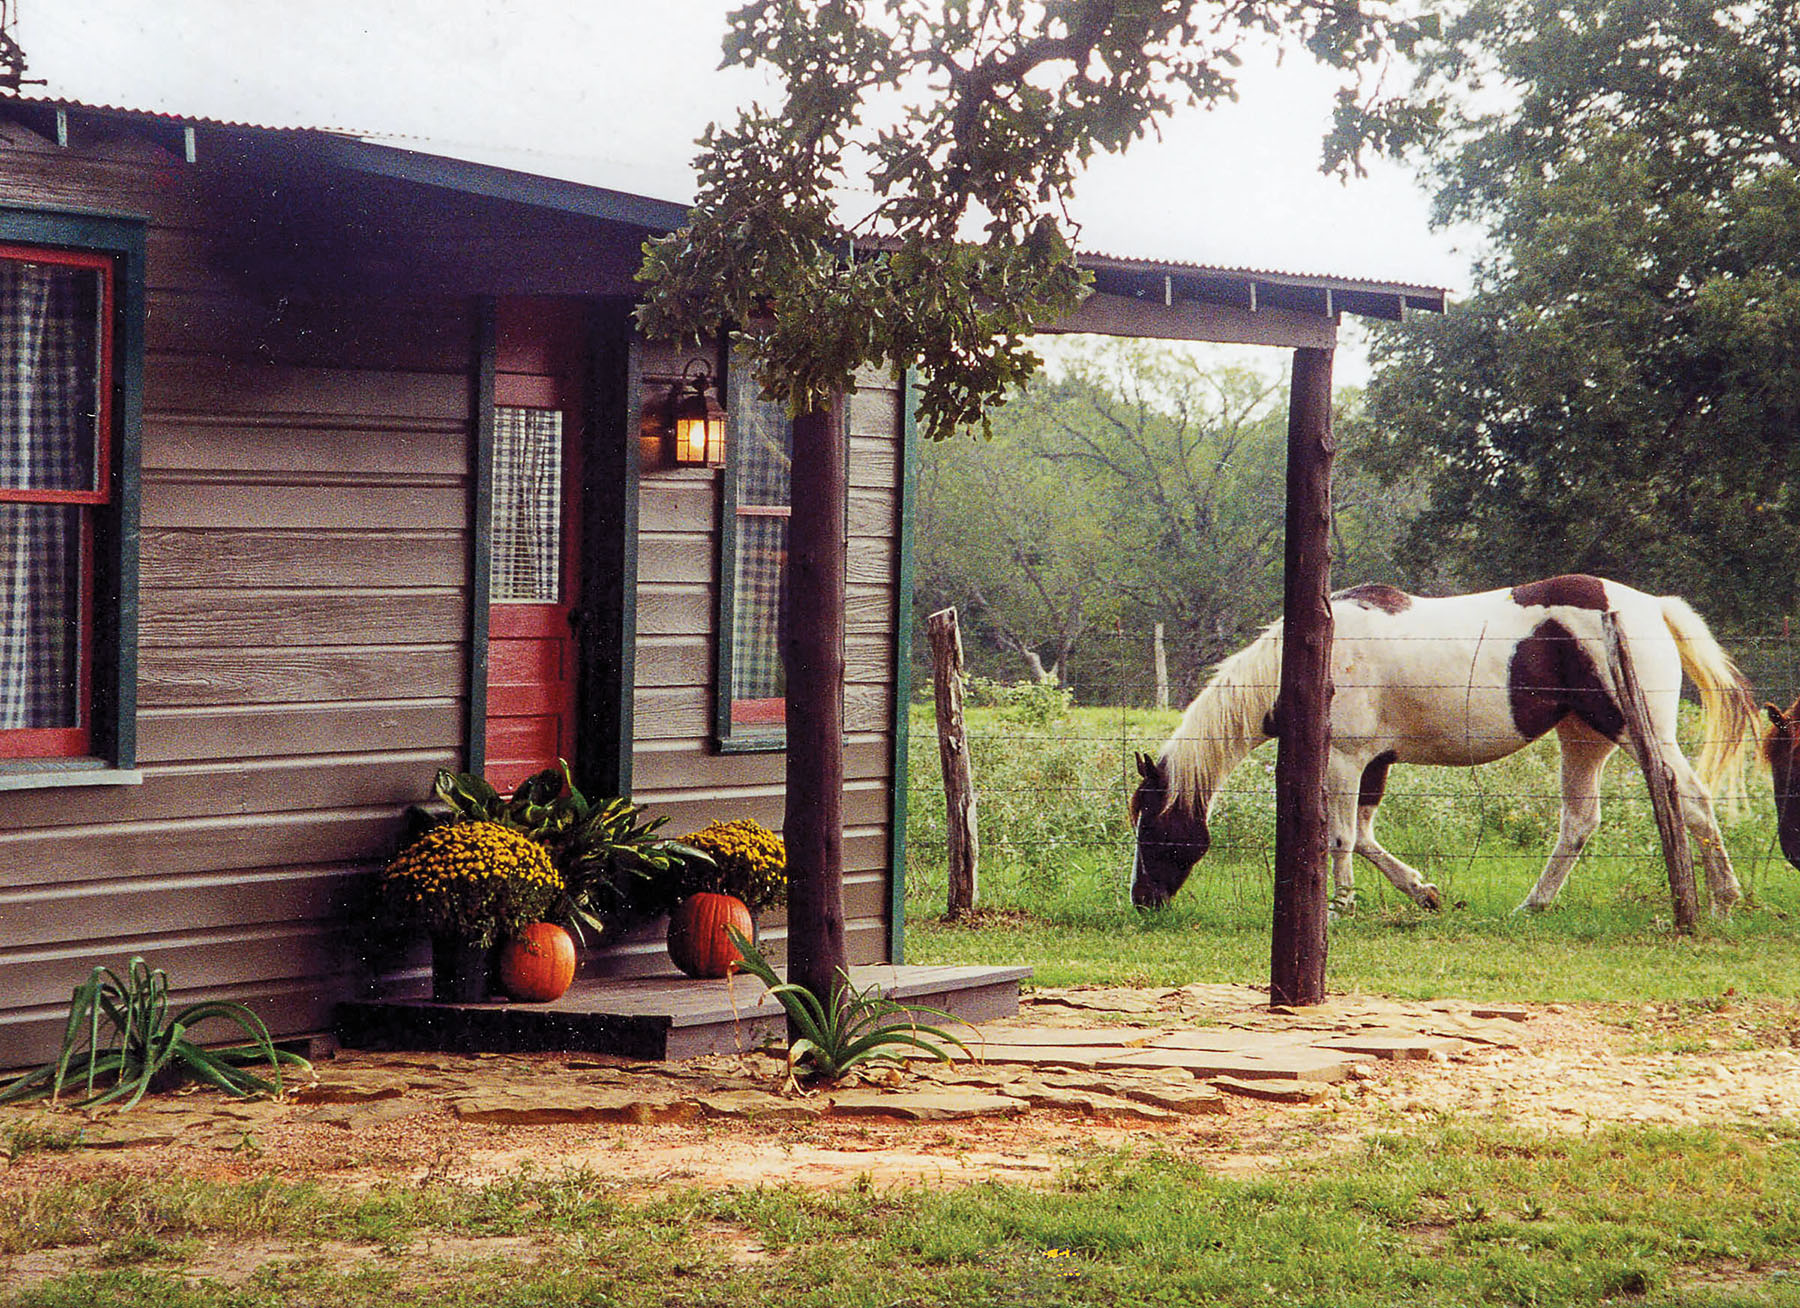 A horse grazes in a field next to a small brown cabin